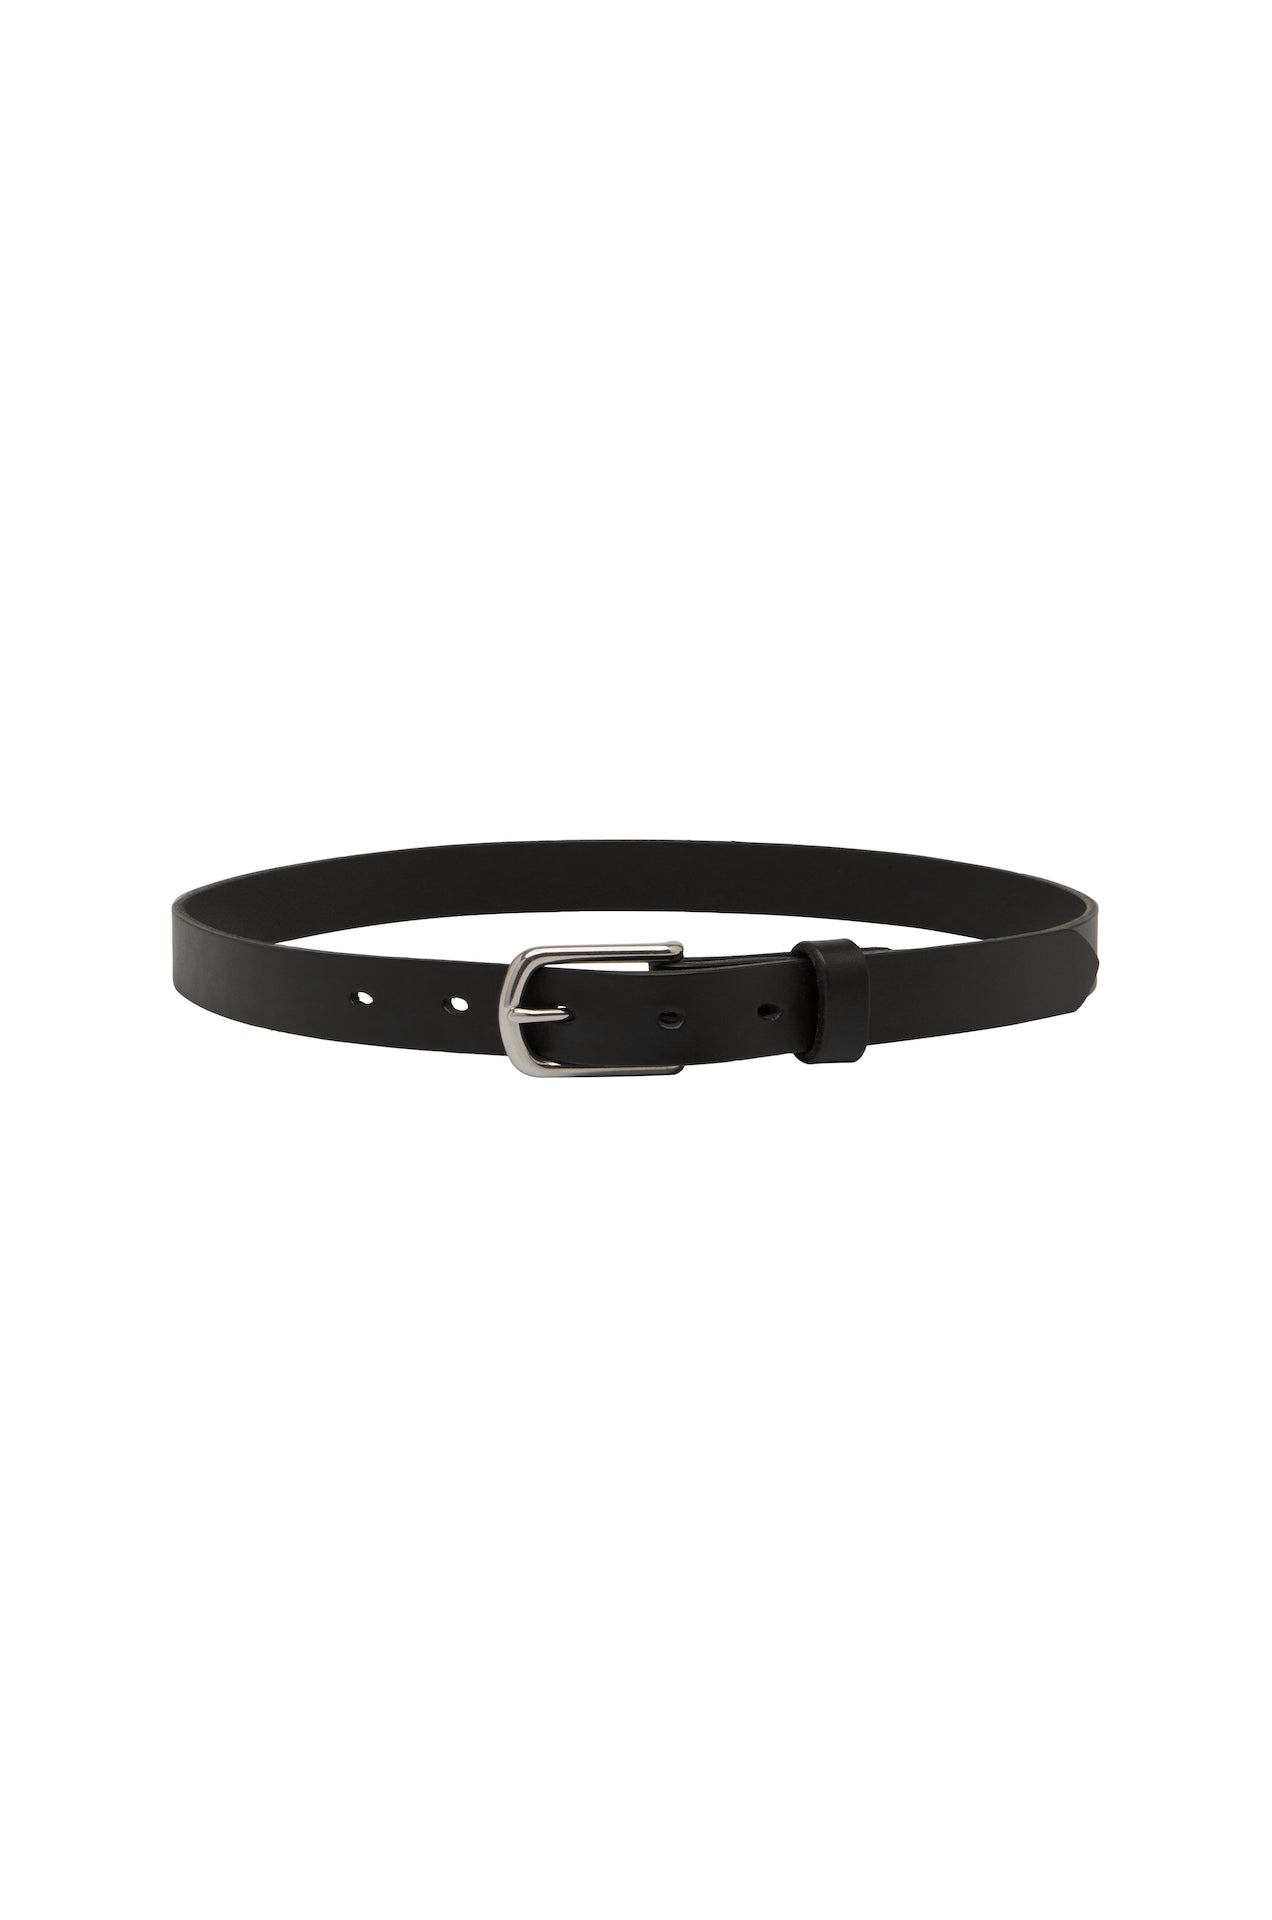 SAINT classic leather belt in black leather with silver stainless steel buckle. made in Australia using traditional leather smith techniques. 100% Italian leather